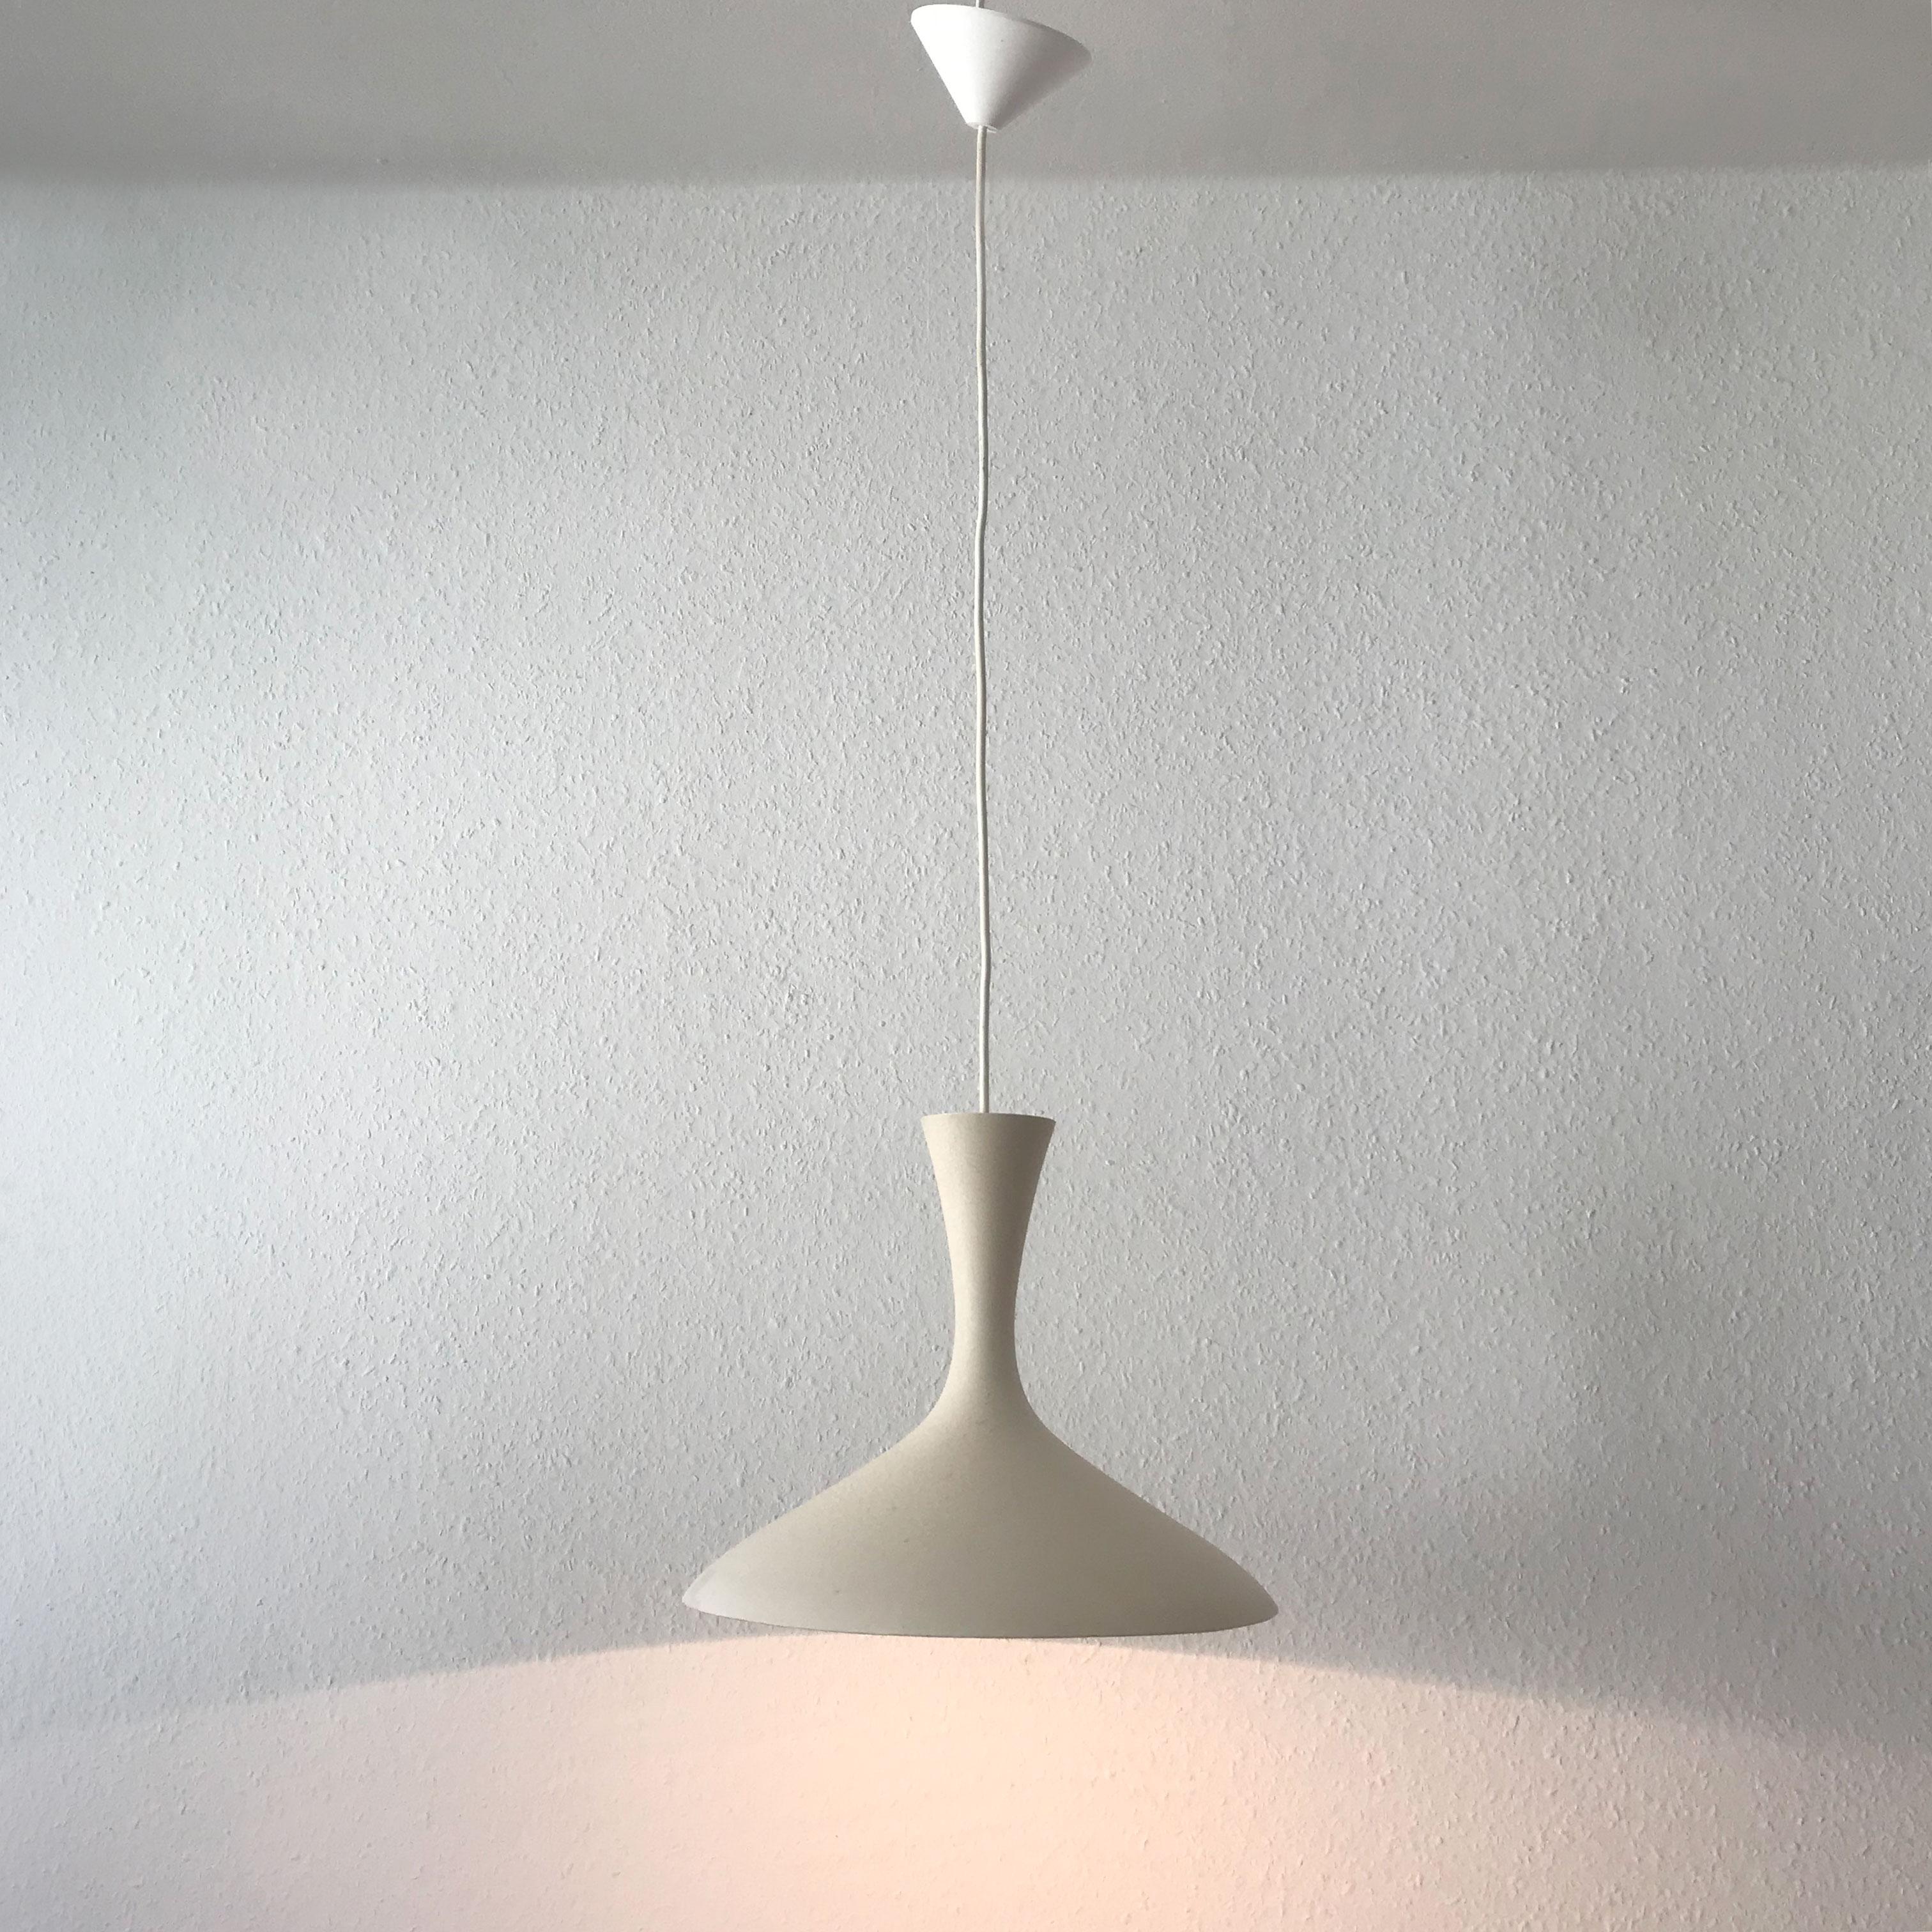 Mid-20th Century Rare and Elegant Pendant Lamp by Louis Kalff for Gebrüder Cosack, 1950s, Germany